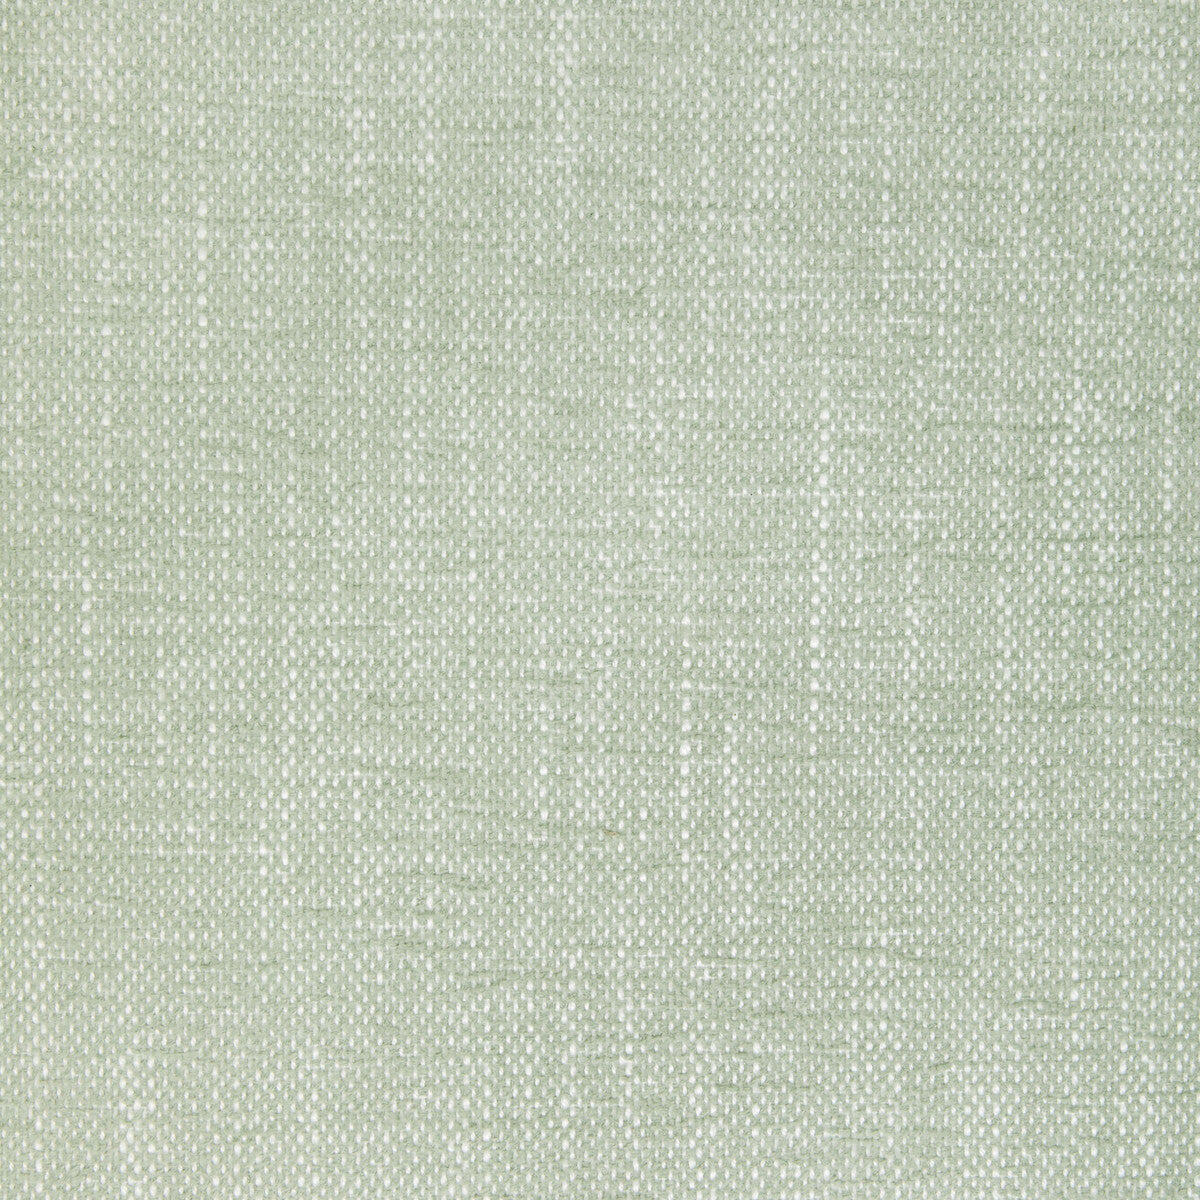 Kravet Smart-36885 fabric in 130 color - pattern 36885.130.0 - by Kravet Smart in the Inside Out Performance Fabrics collection